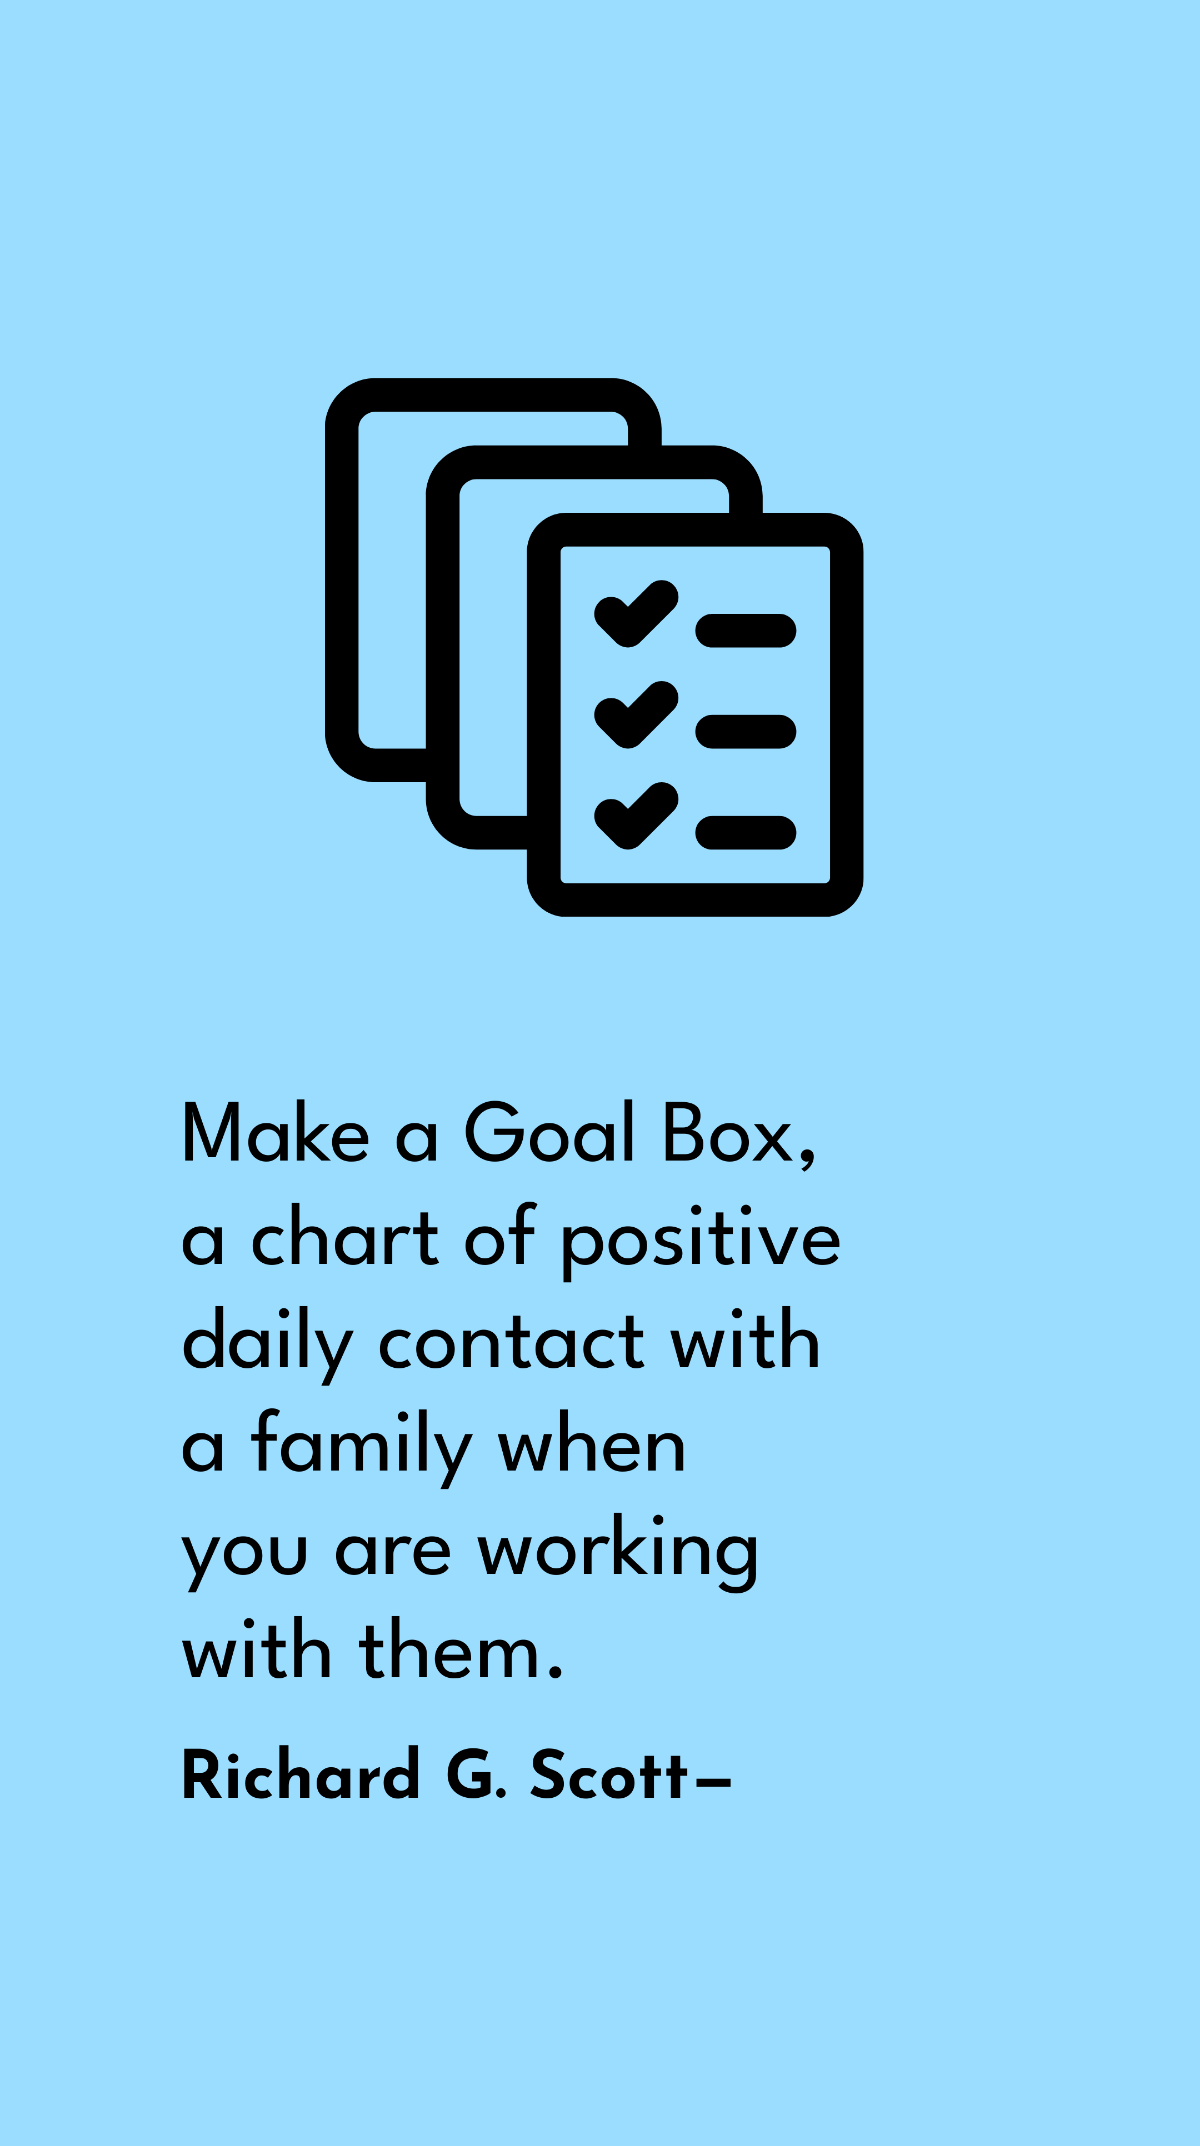 Richard G. Scott - Make a Goal Box, a chart of positive daily contact with a family when you are working with them. Template